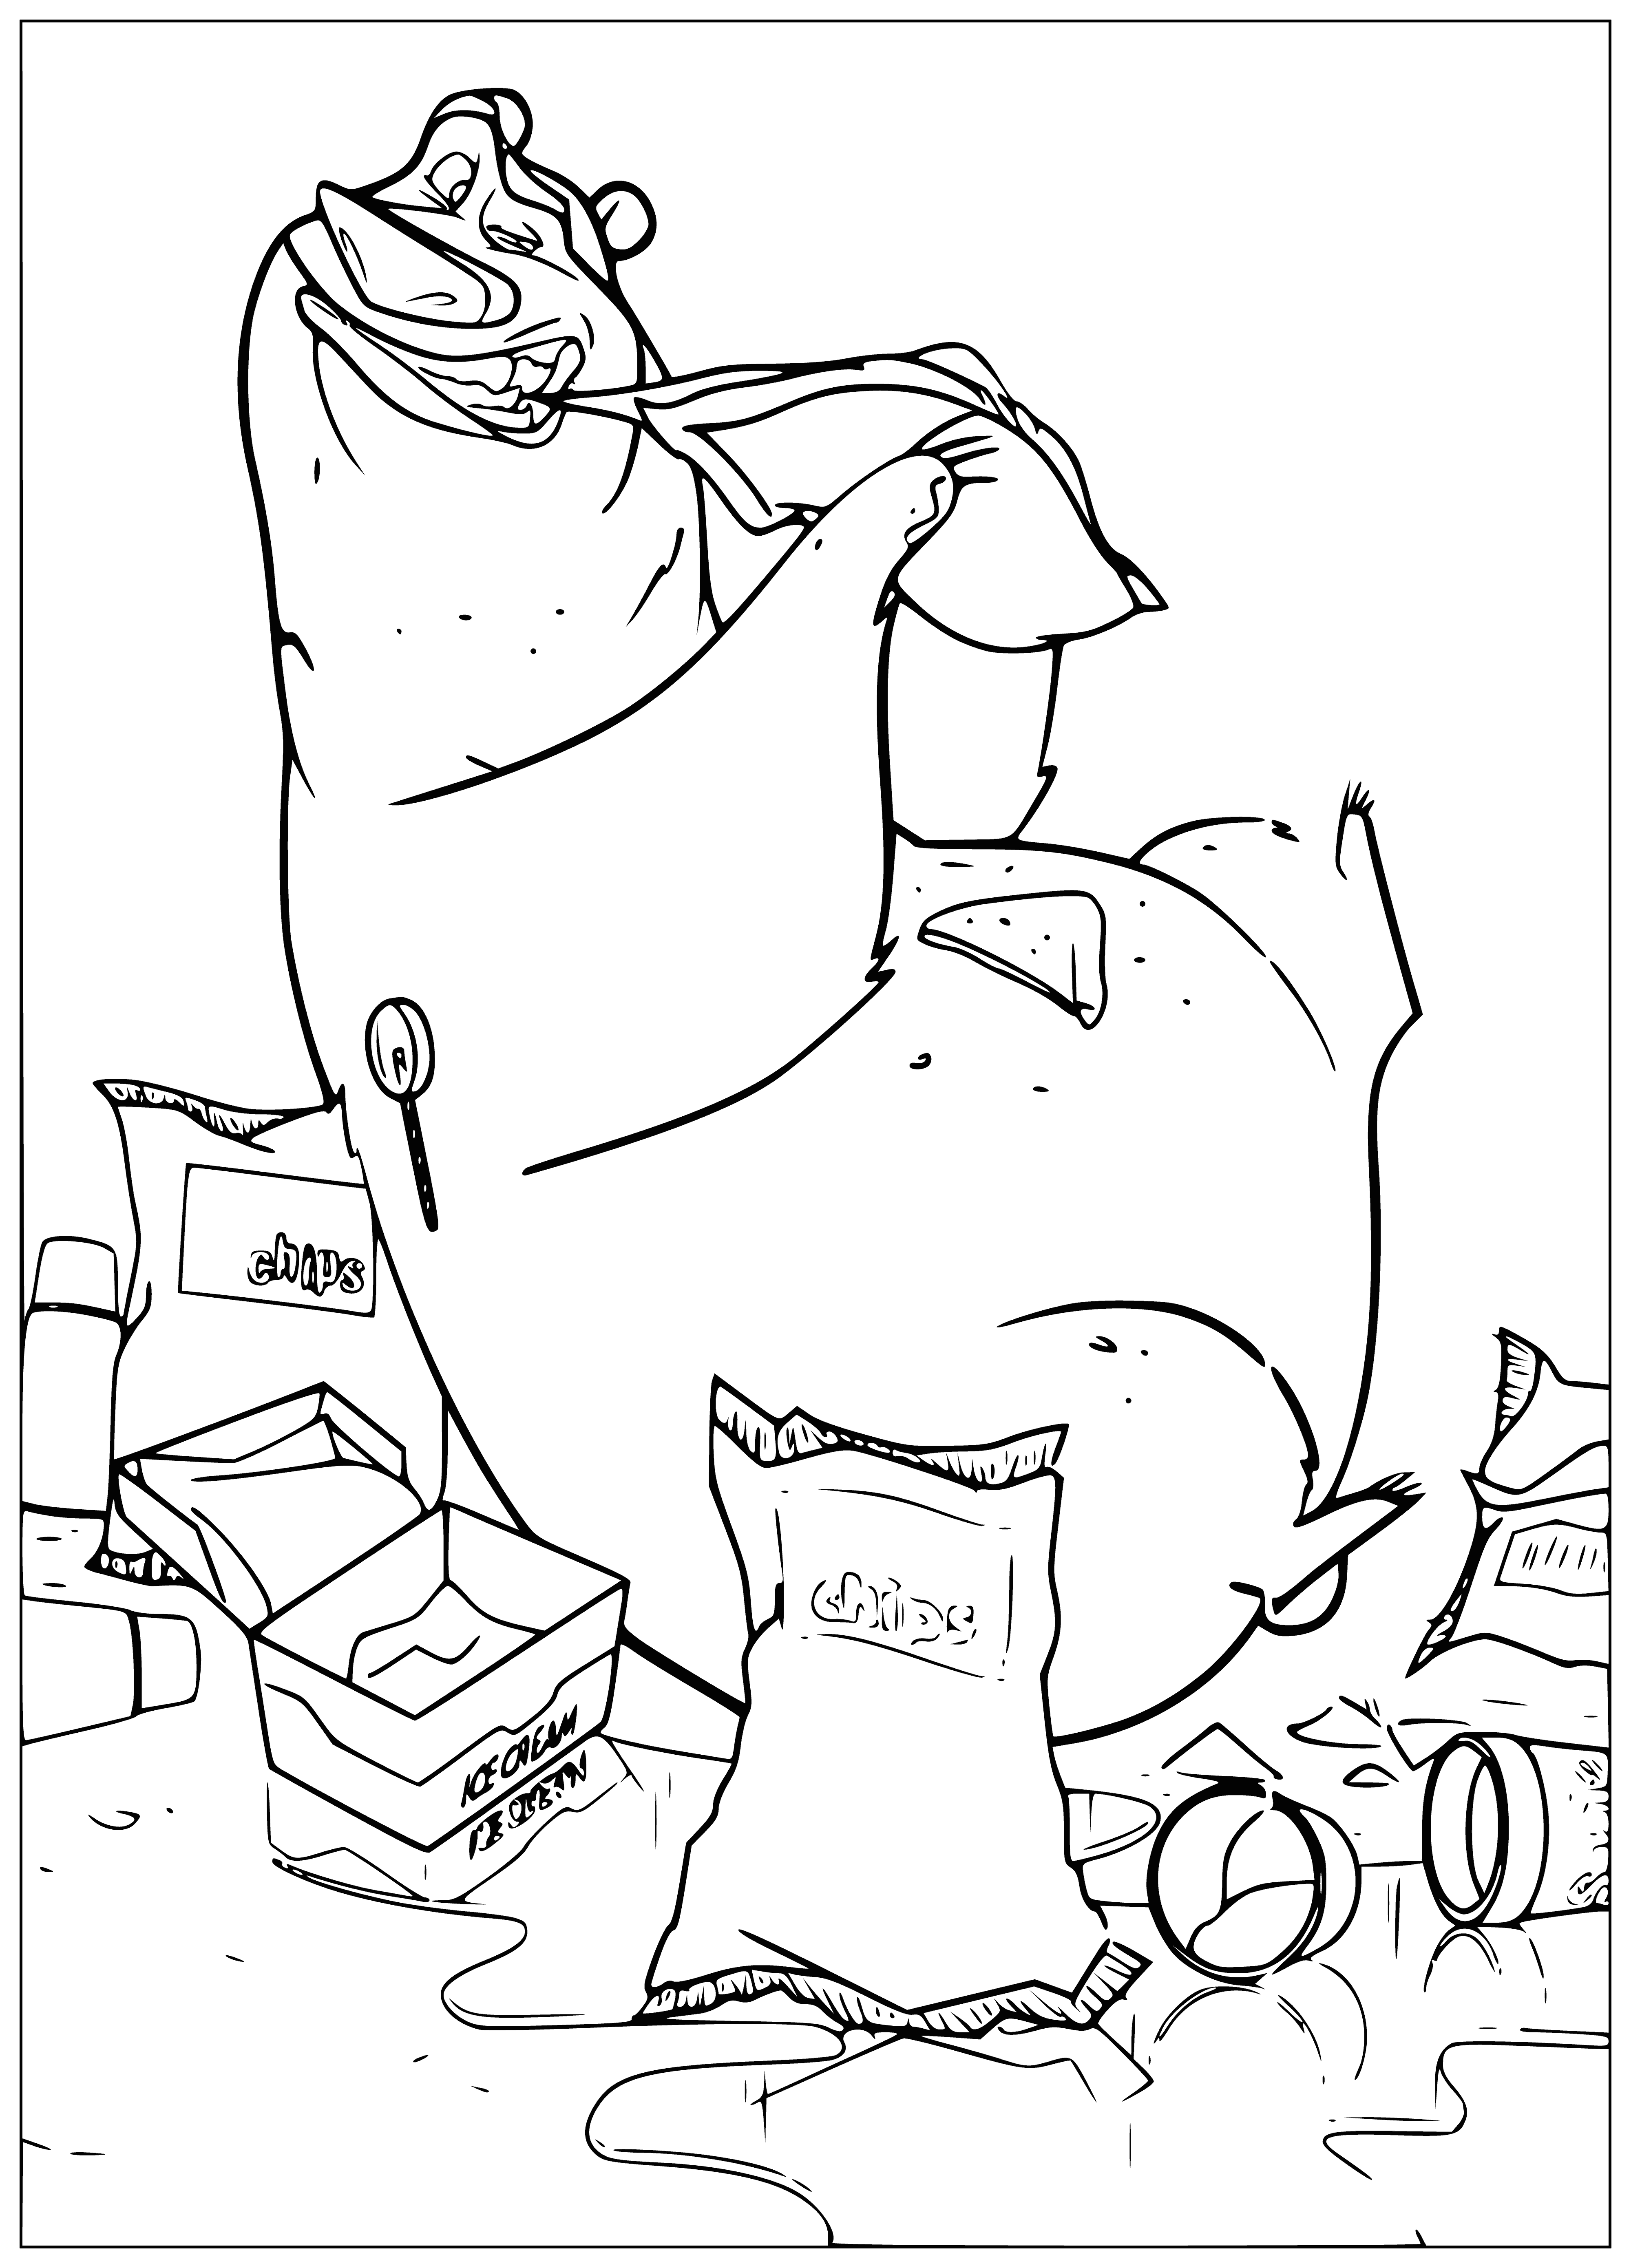 Pizza, ice cream, chips ... coloring page